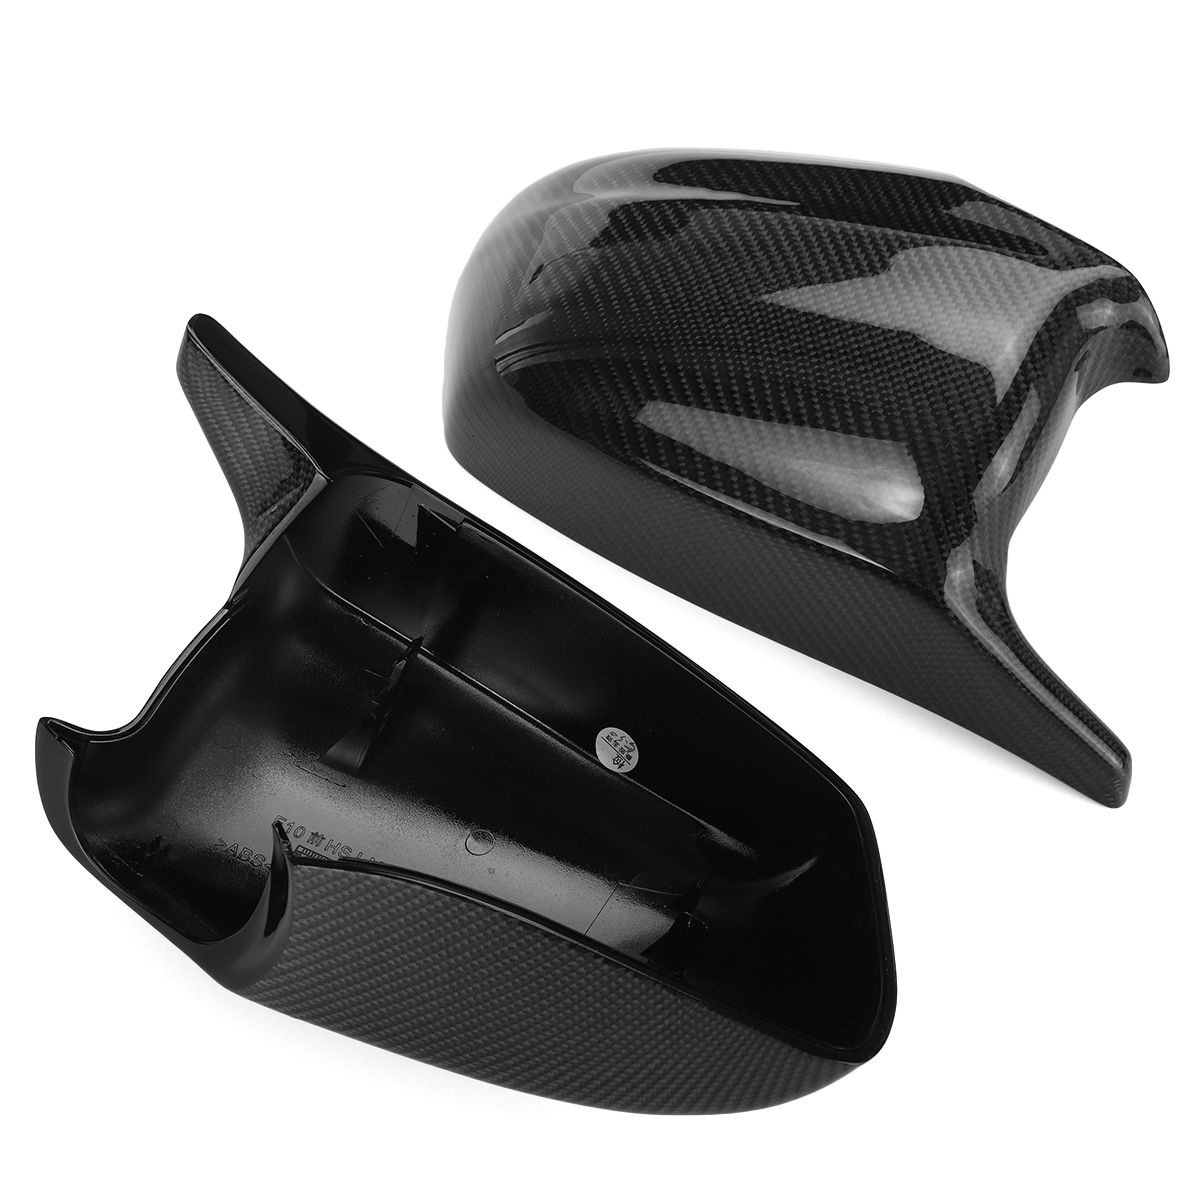 M-Style-Real-Carbon-Fiber-Rear-View-Mirror-Cap-Cover-Replacement-For-BMW-F10-F11-F18-2010-2013-1754883